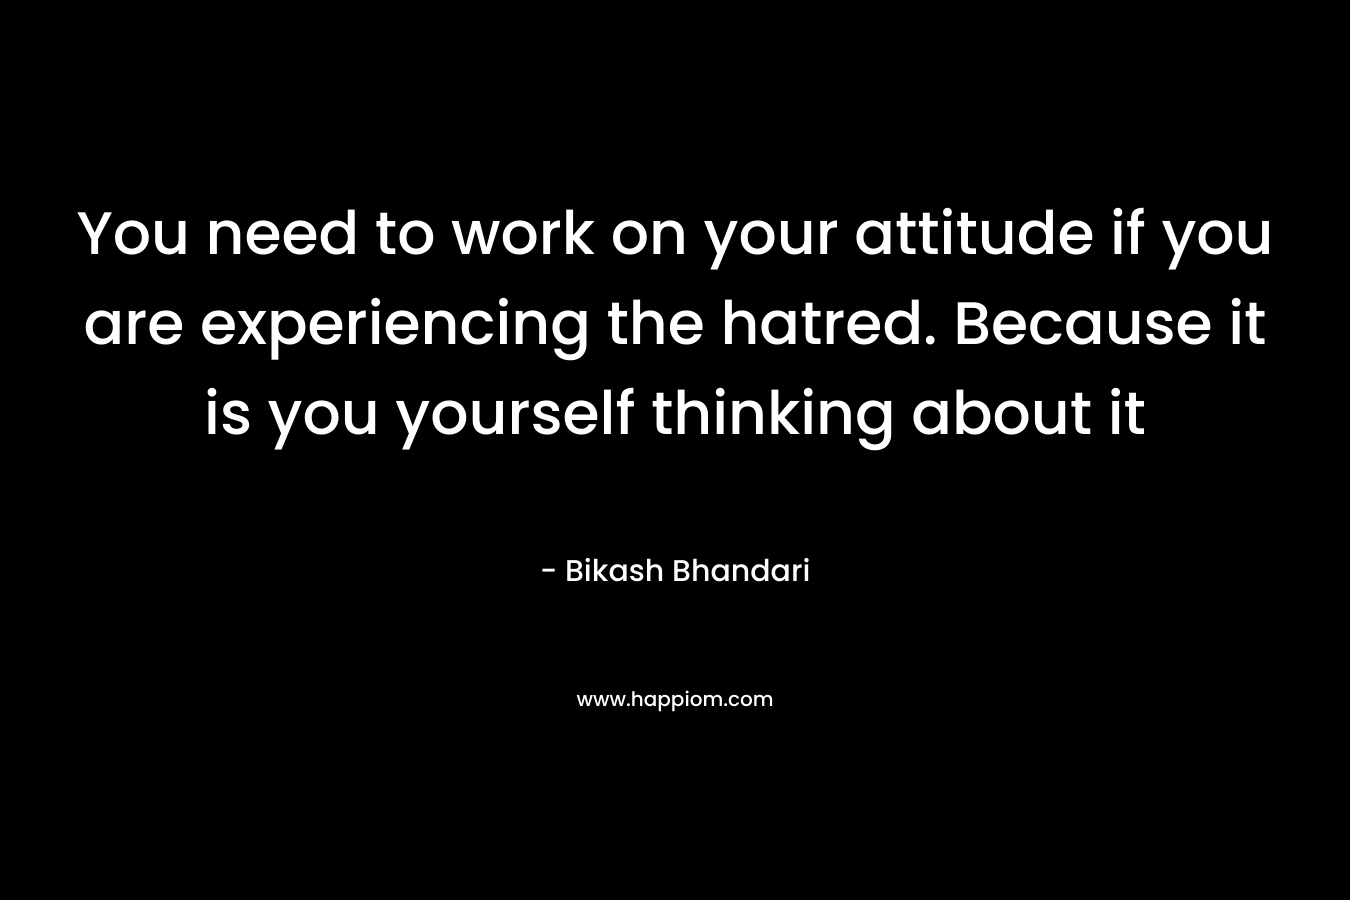 You need to work on your attitude if you are experiencing the hatred. Because it is you yourself thinking about it – Bikash Bhandari